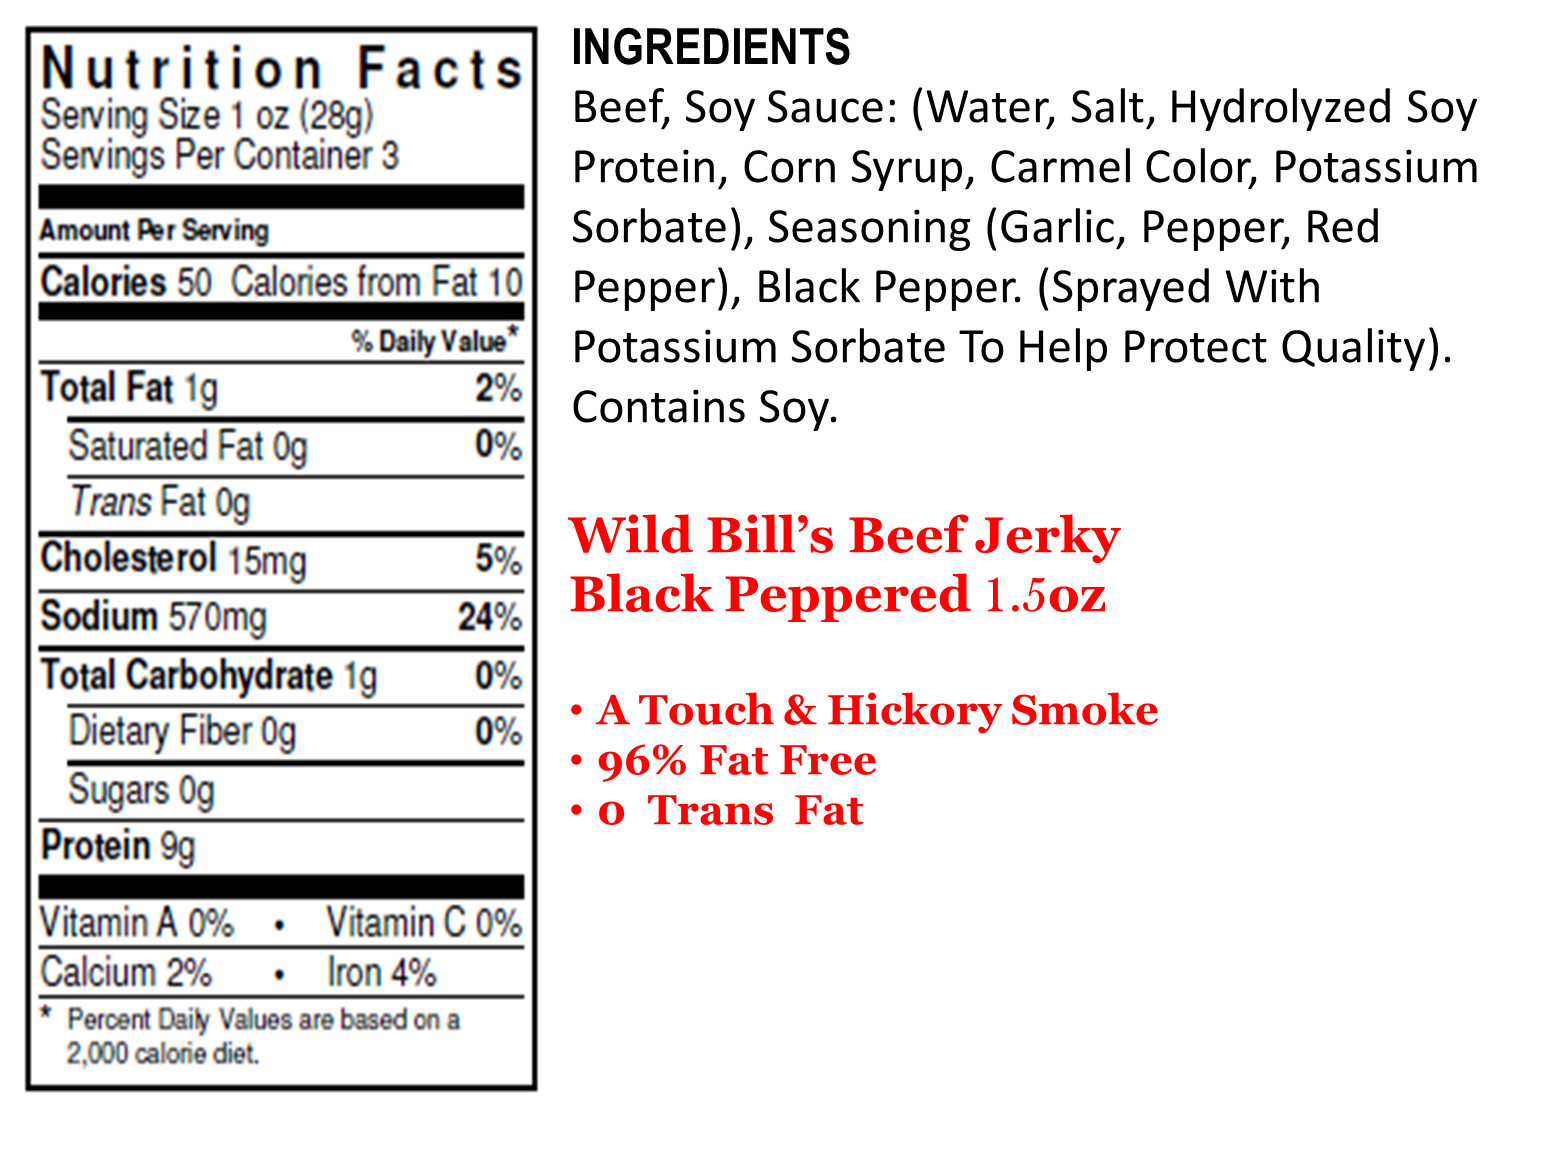 Wild Bill's Black Pepper packs a punch.  If you love a little bit of heat and a whole lot of smoke, this is the jerky for you.  In the popular 3oz bag, some folks say it's the true taste of the West......ACCORDING TO BILL! Ingredients